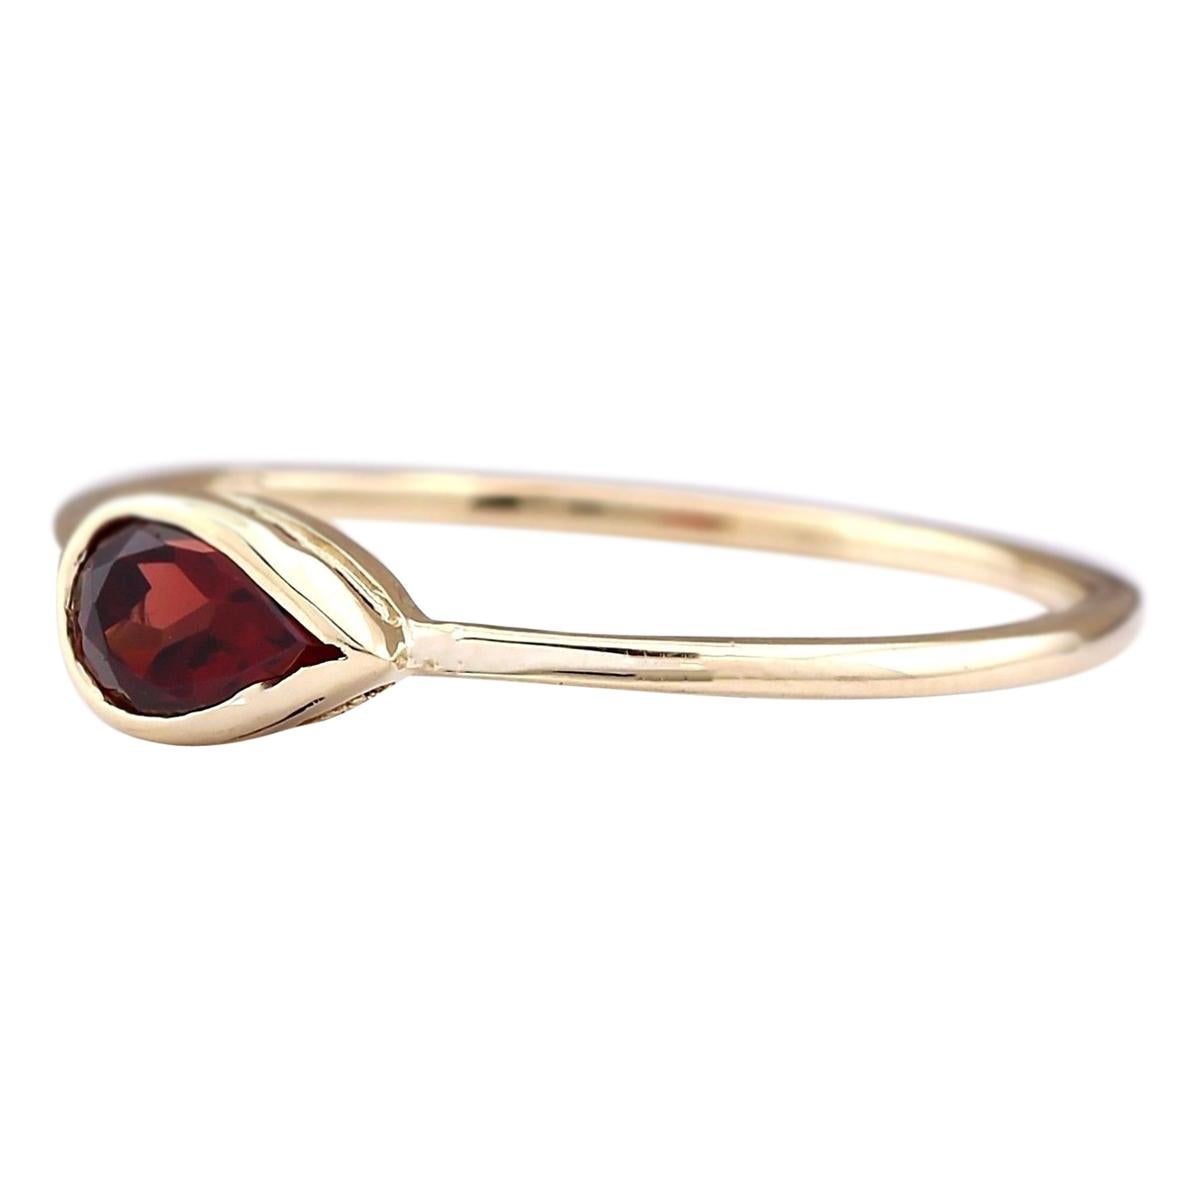 Introducing our charming 14K Yellow Gold Ring adorned with a delightful 0.50 Carat Rhodolite Garnet centerpiece. Stamped for authenticity, this ring weighs a total of 1.1 grams, making it lightweight and comfortable to wear. The Rhodolite Garnet,